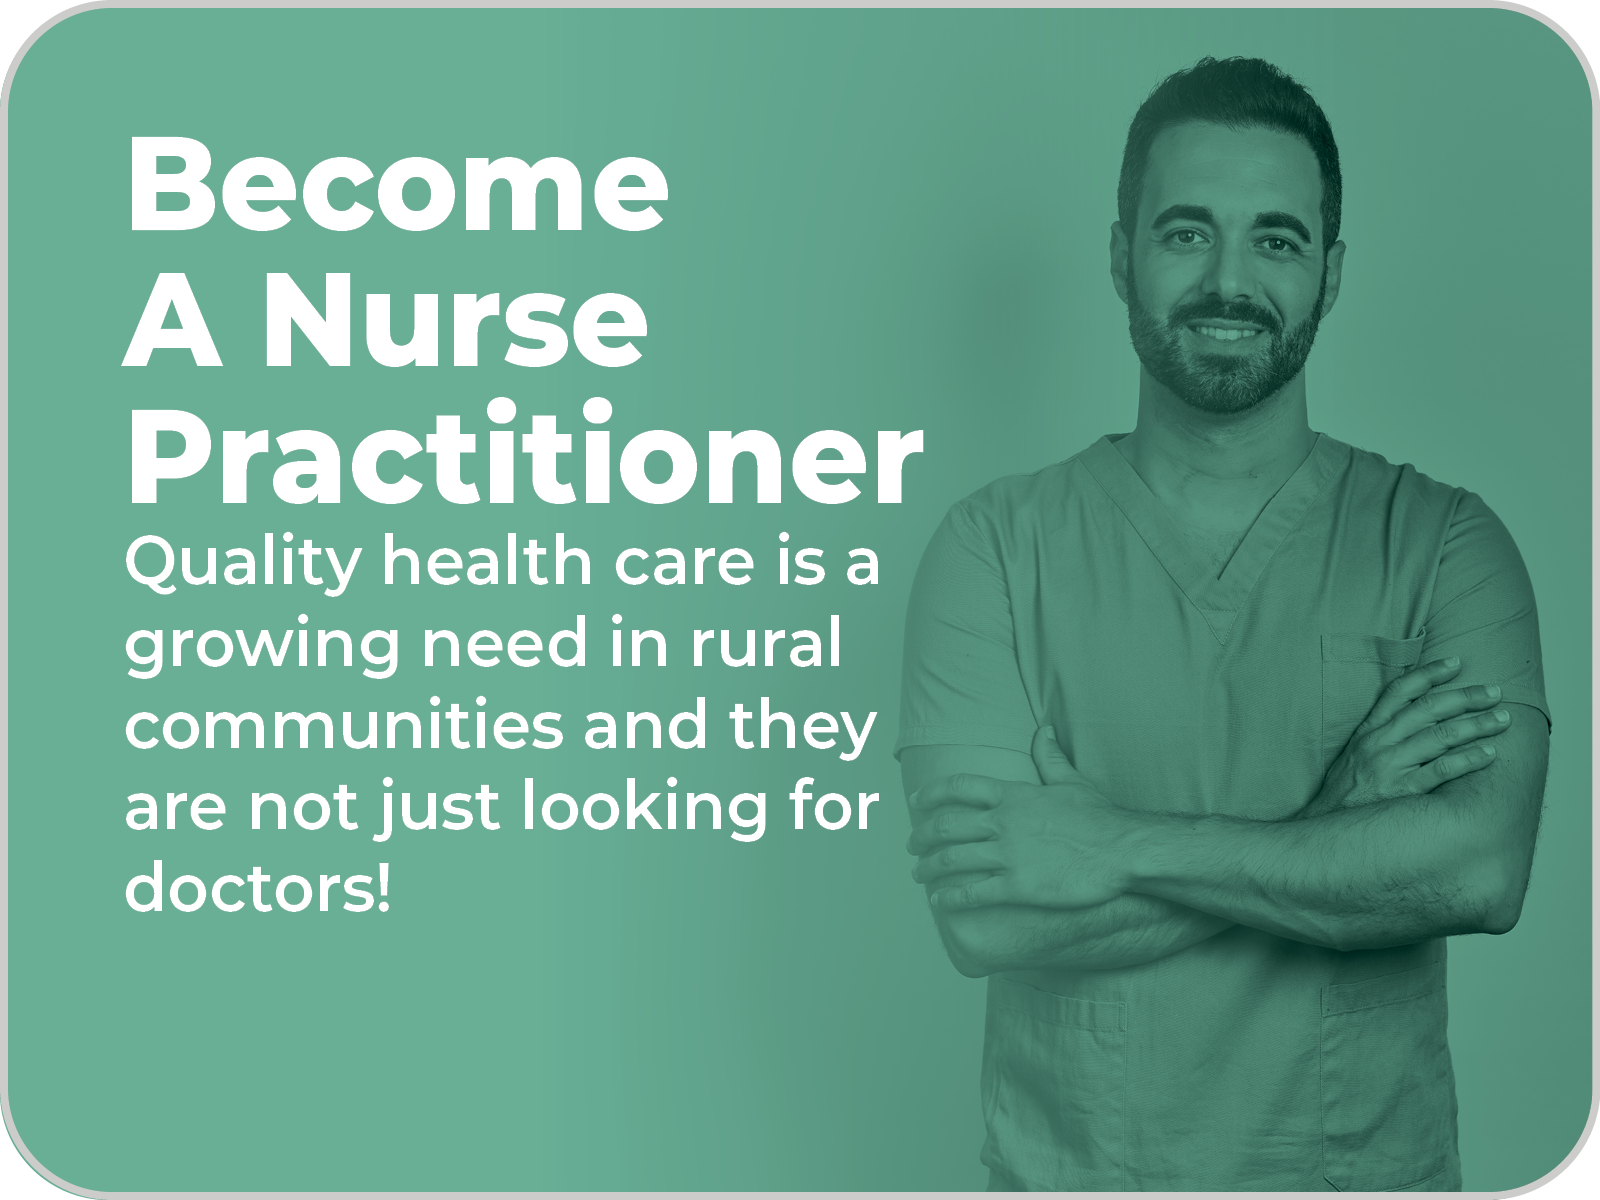 green box with image of man nurse practicioner and words "Become a Nurse Practicitioner"